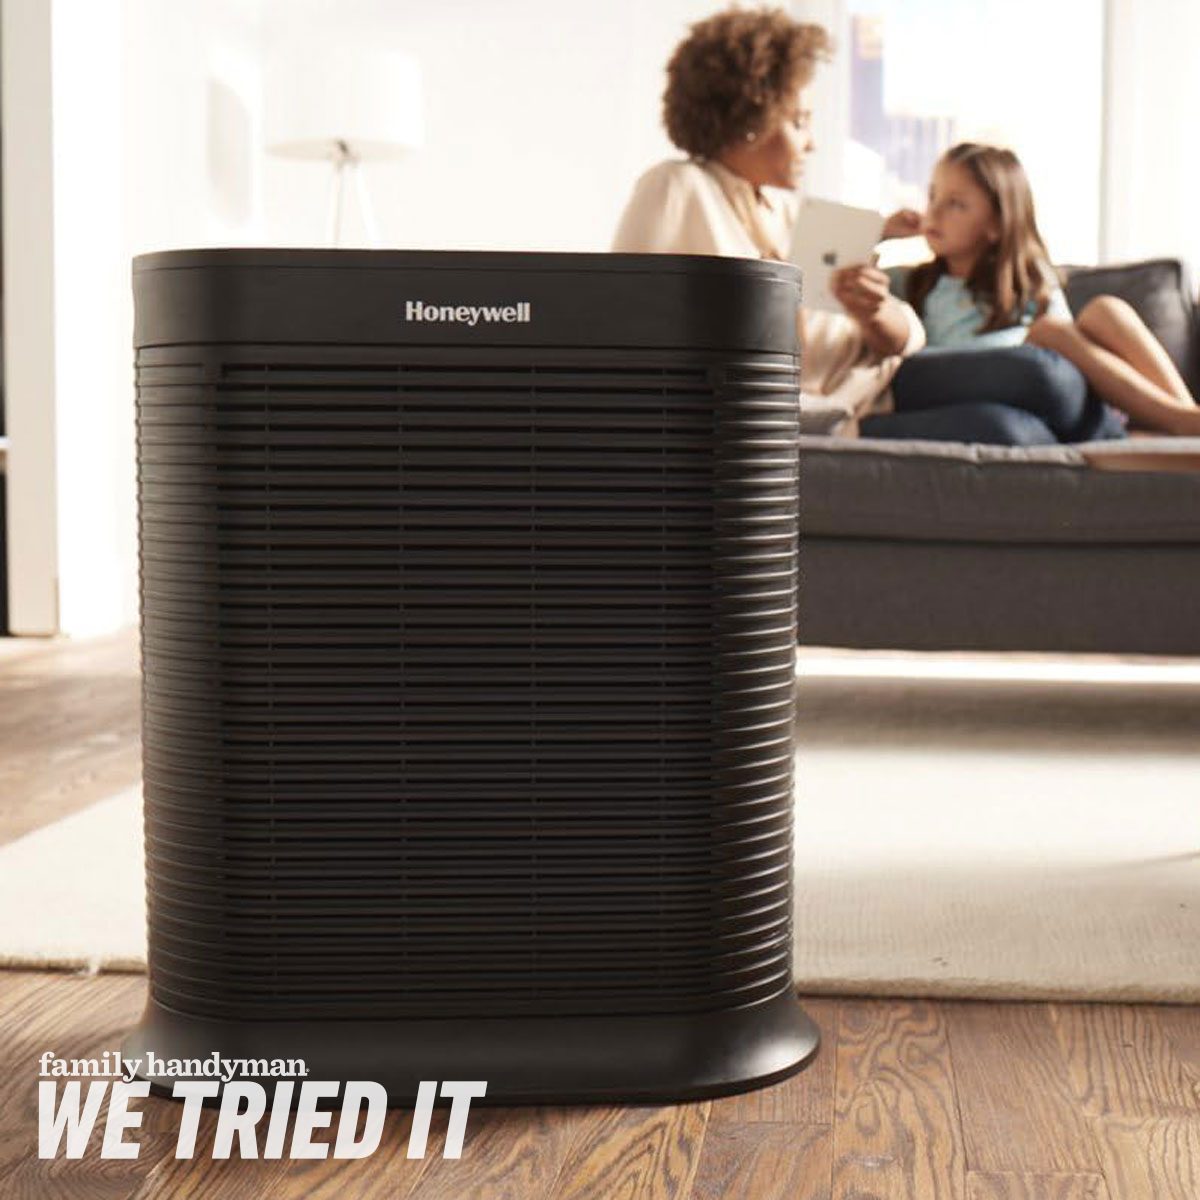 Why Amazon Reviewers Love this HEPA Air Purifier